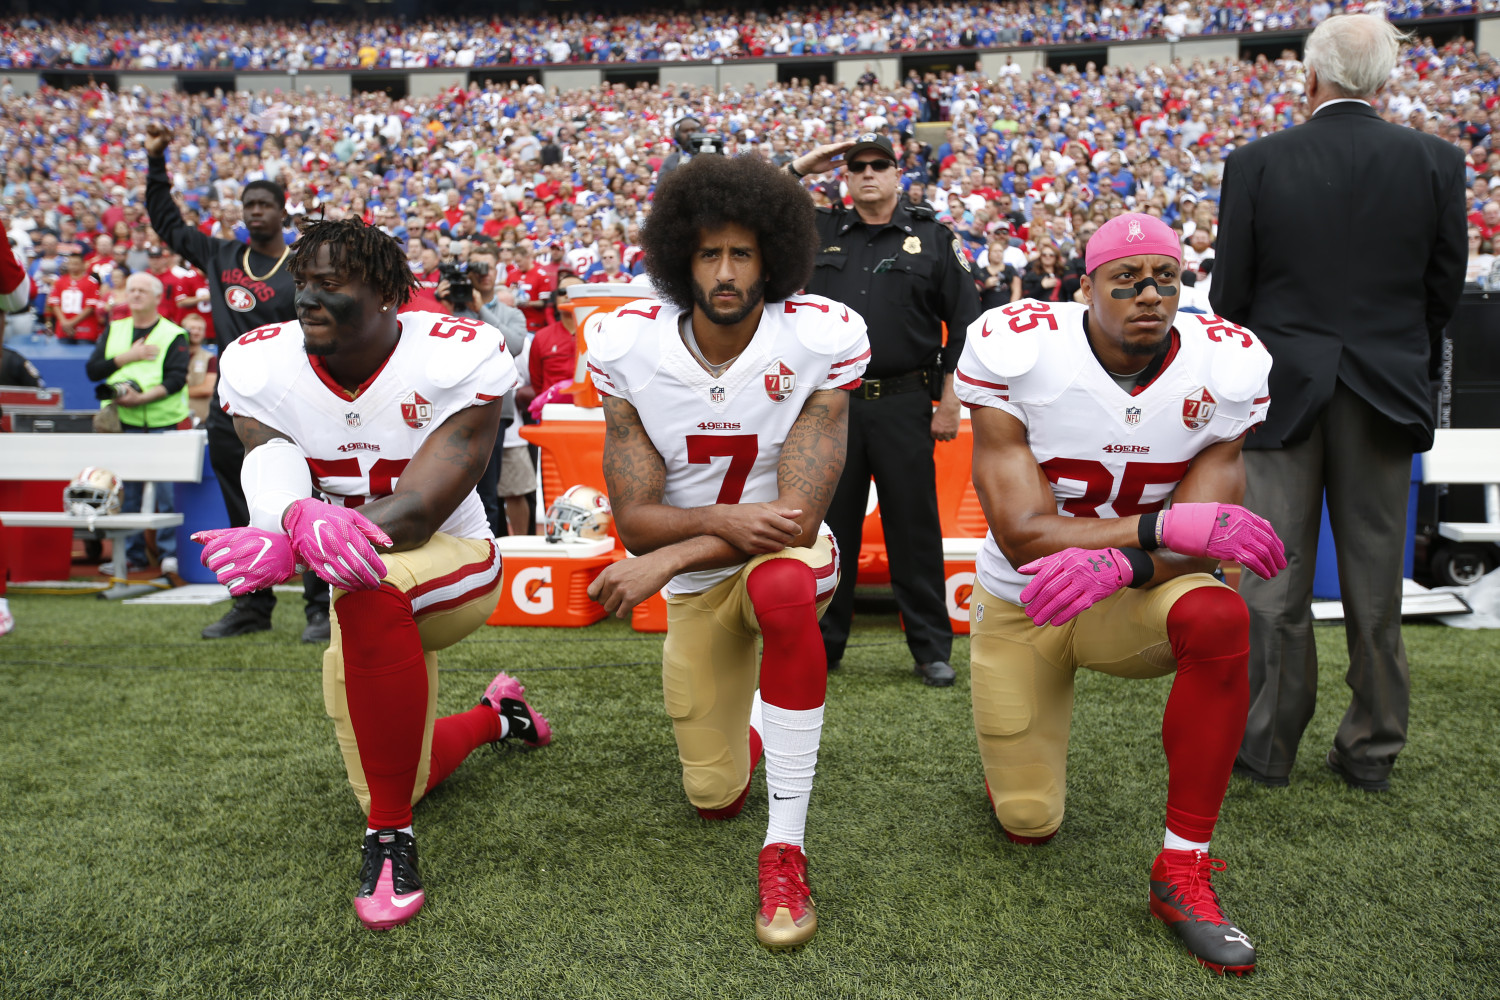 Colin Kaepernick's collusion case against NFL to go to trial